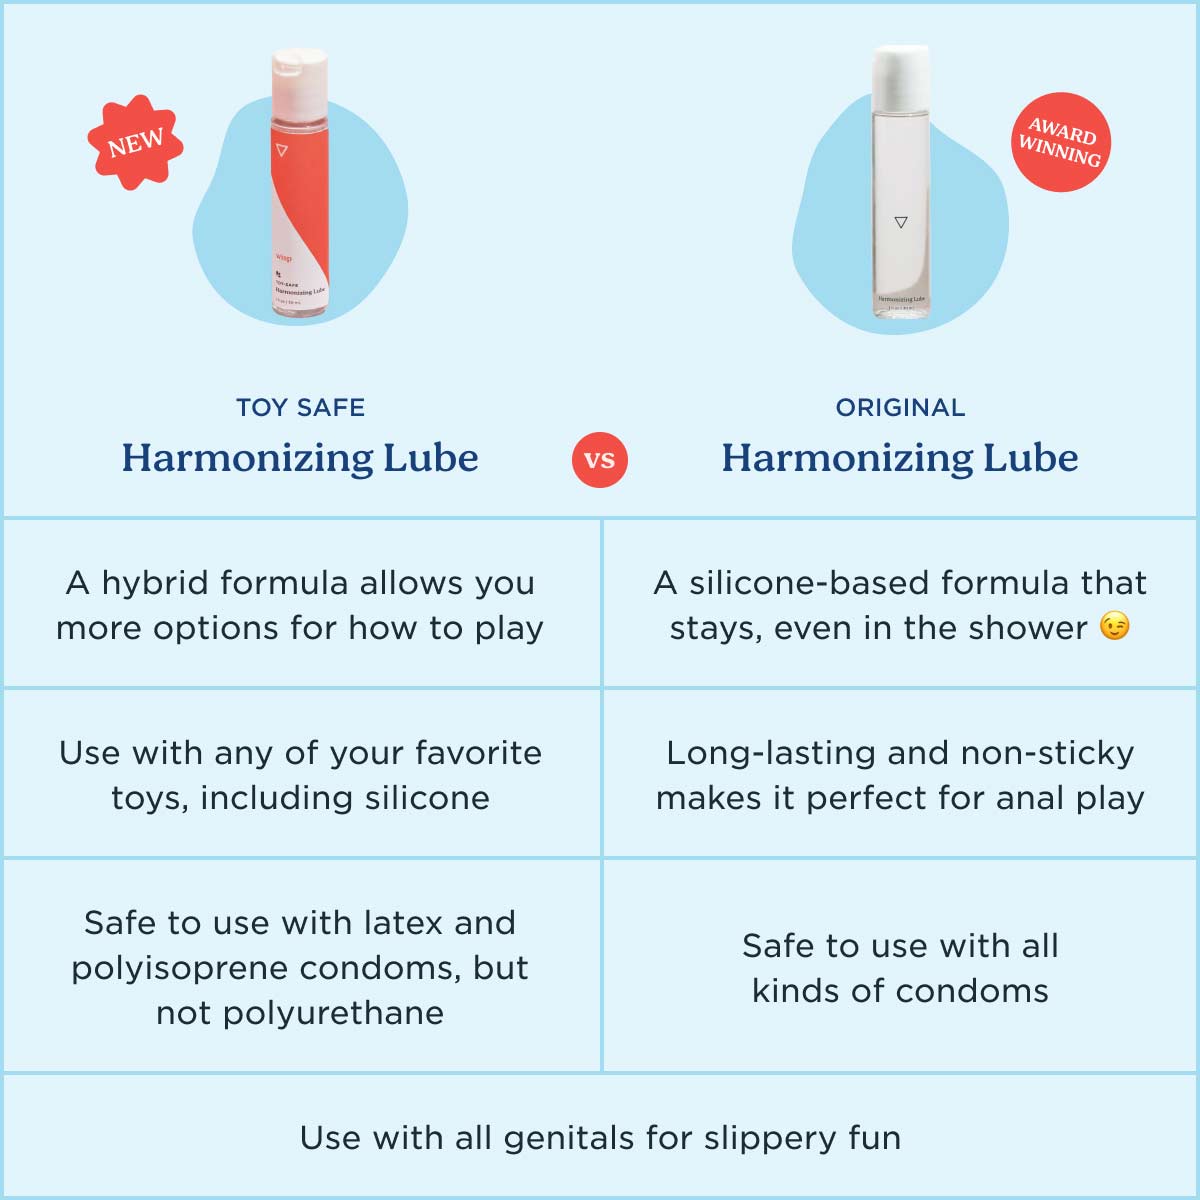 Chart comparing the differences between Original Harmonizing Lube and Toy-Safe Harmonizing Lube